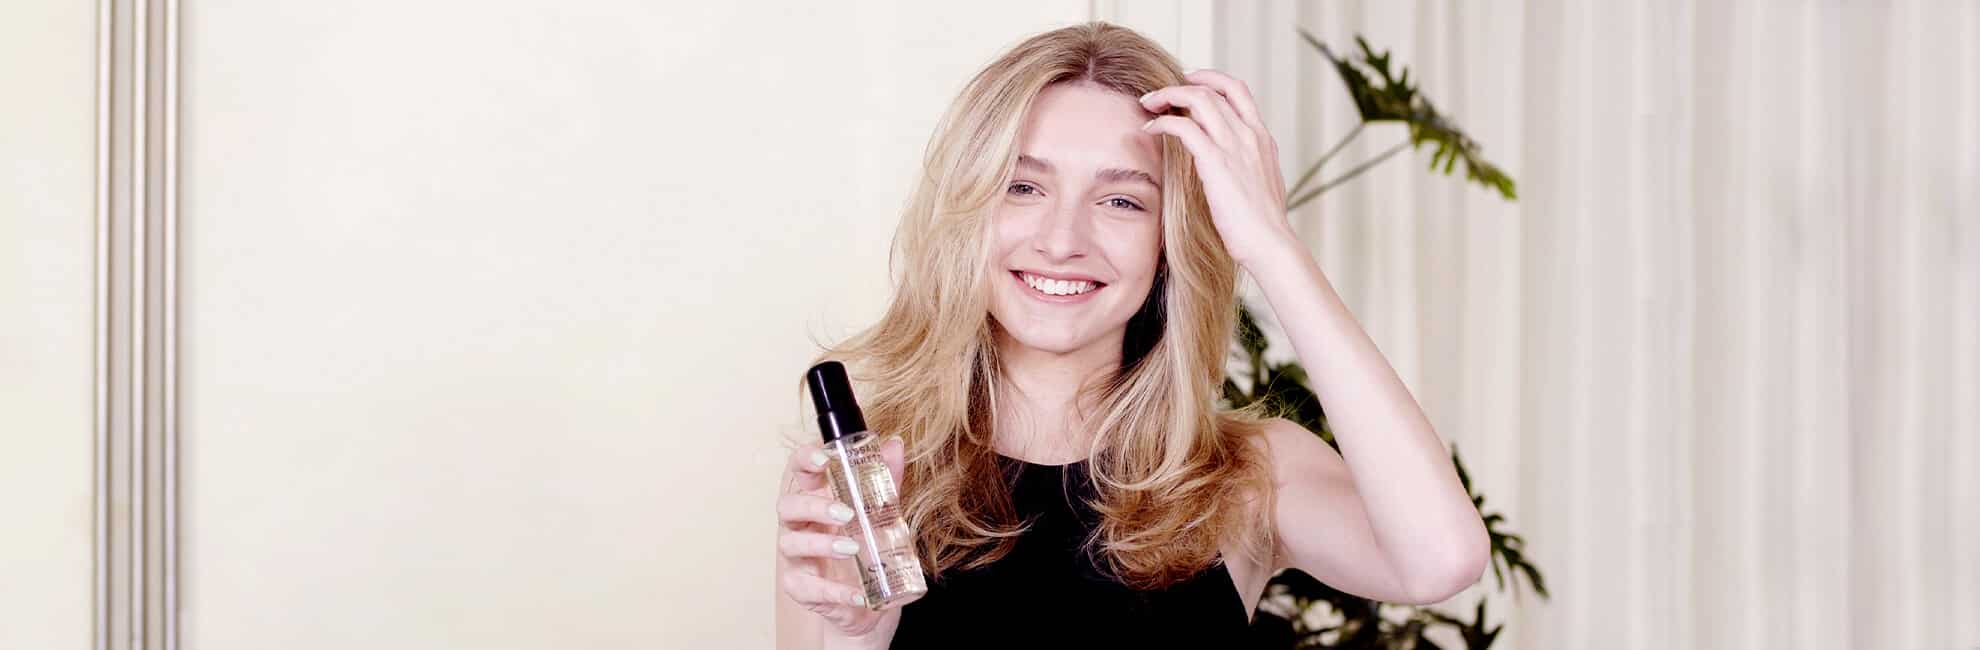 How to get bouncy hair with Italian Designer Haircare | Rossano Ferretti